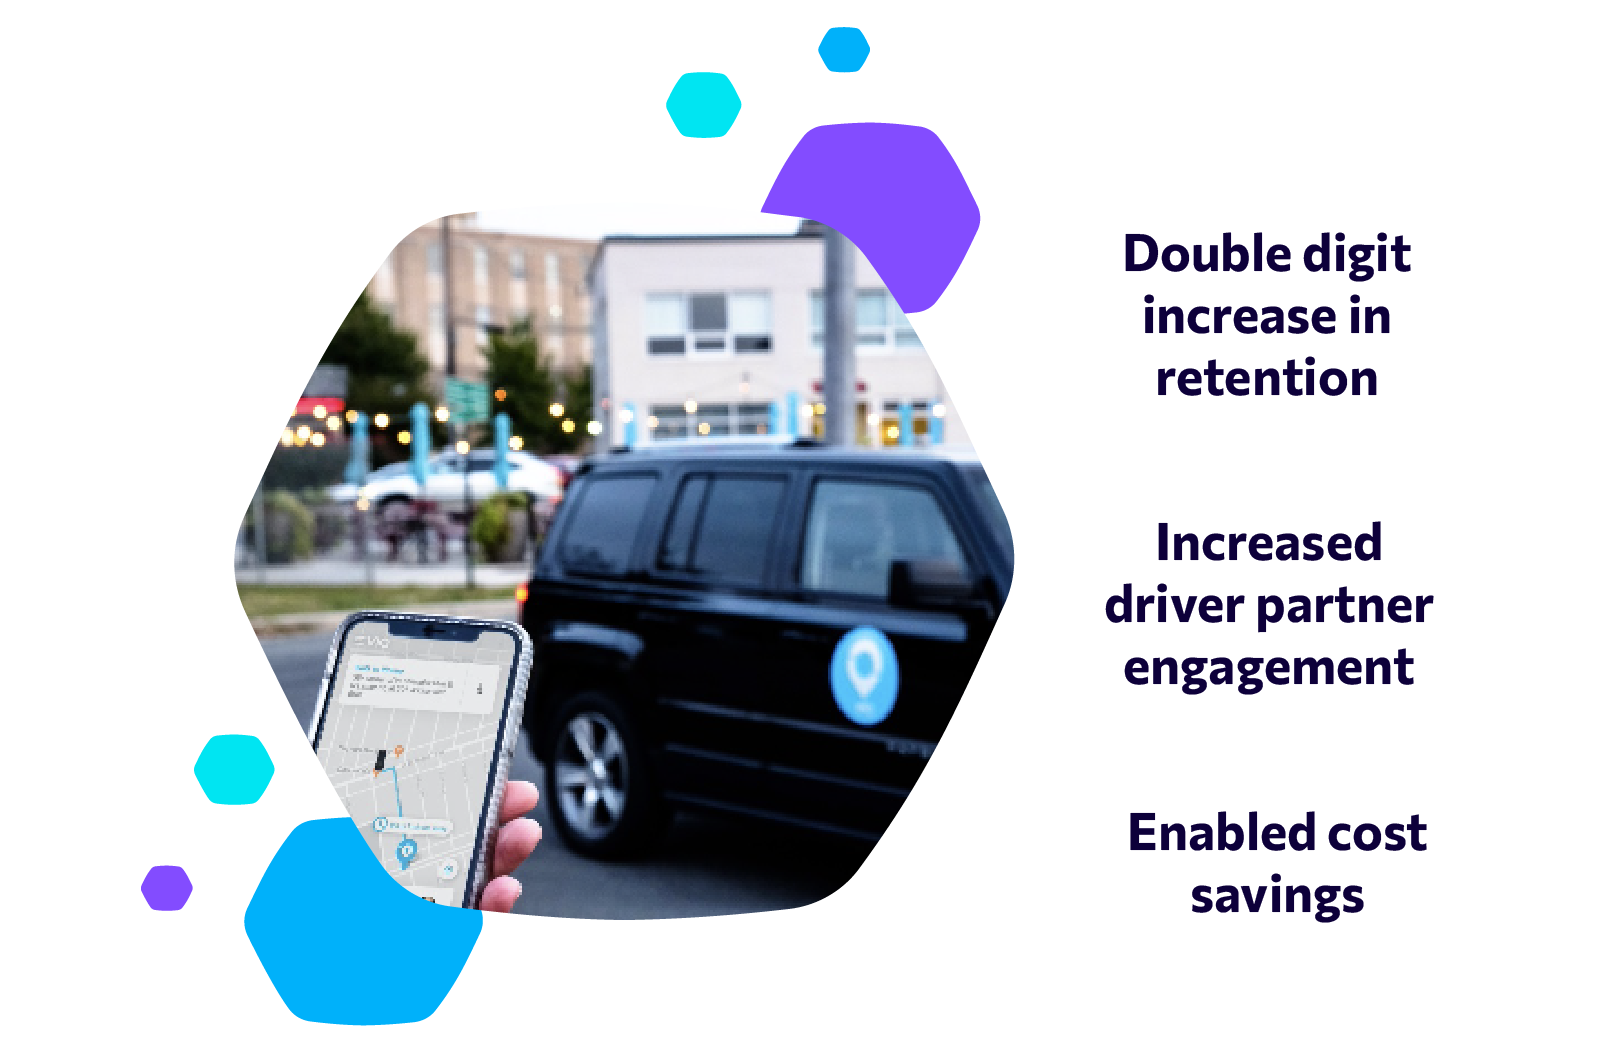 Via saw a double digit increase in retention, increased driver partner engagement and enabled cost savings